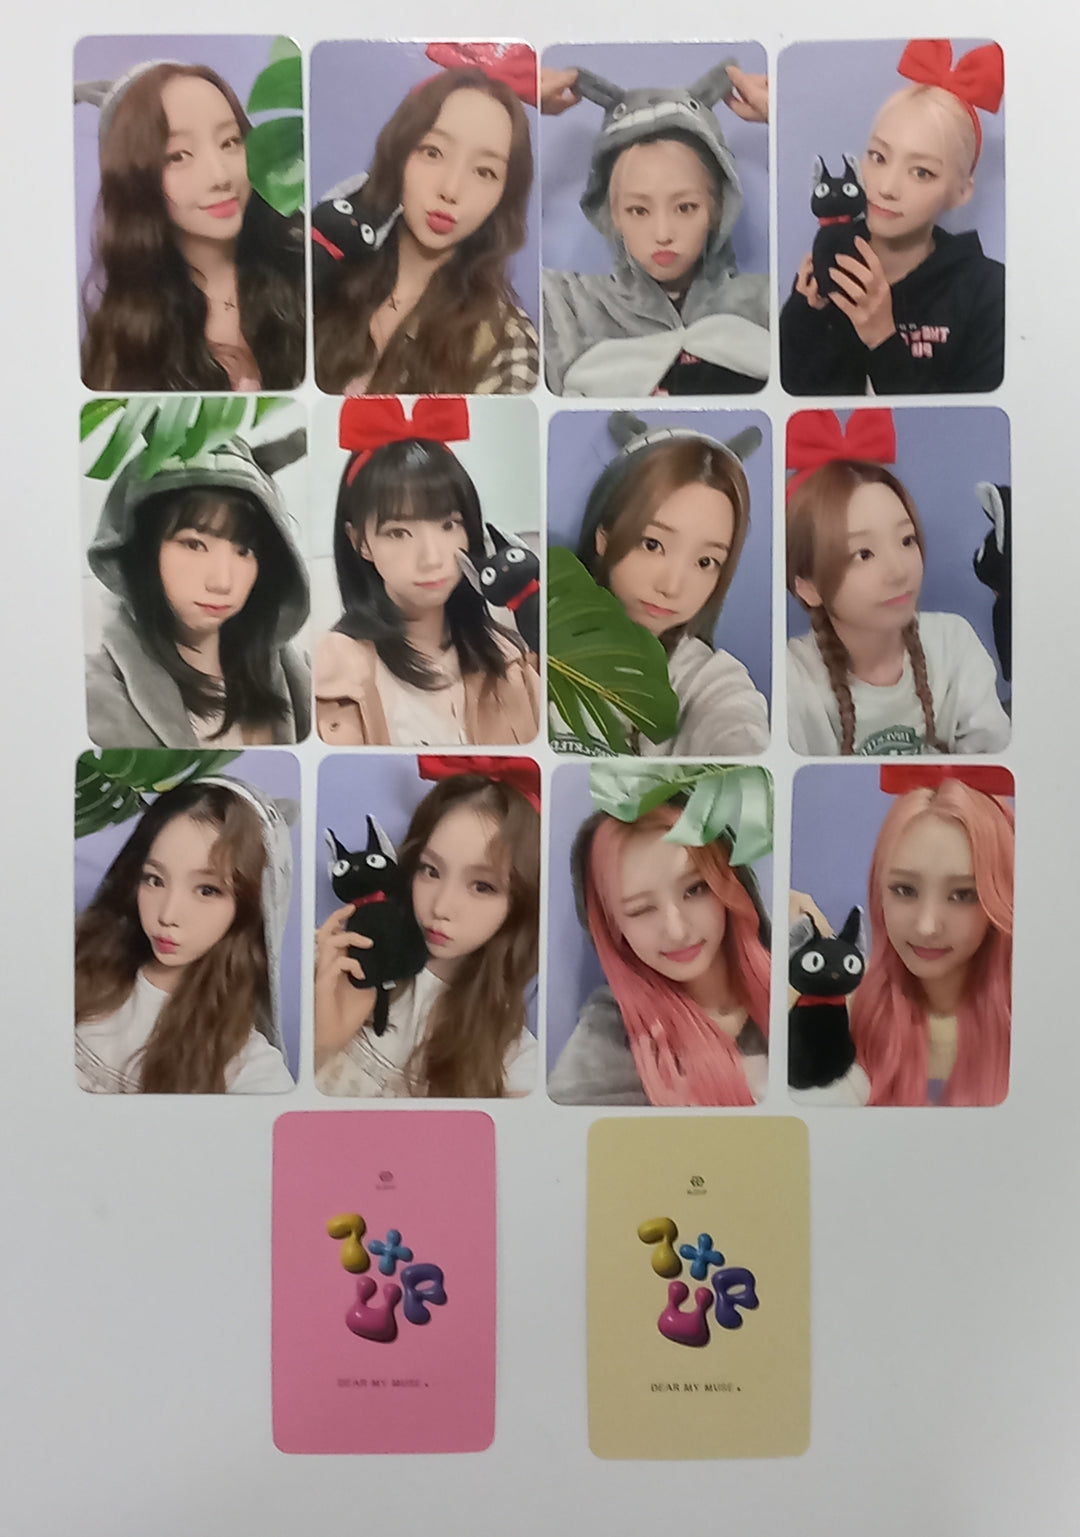 EL7Z U+P "7+UP" - Dear My Muse Fansign Event Photocard [23.11.16]